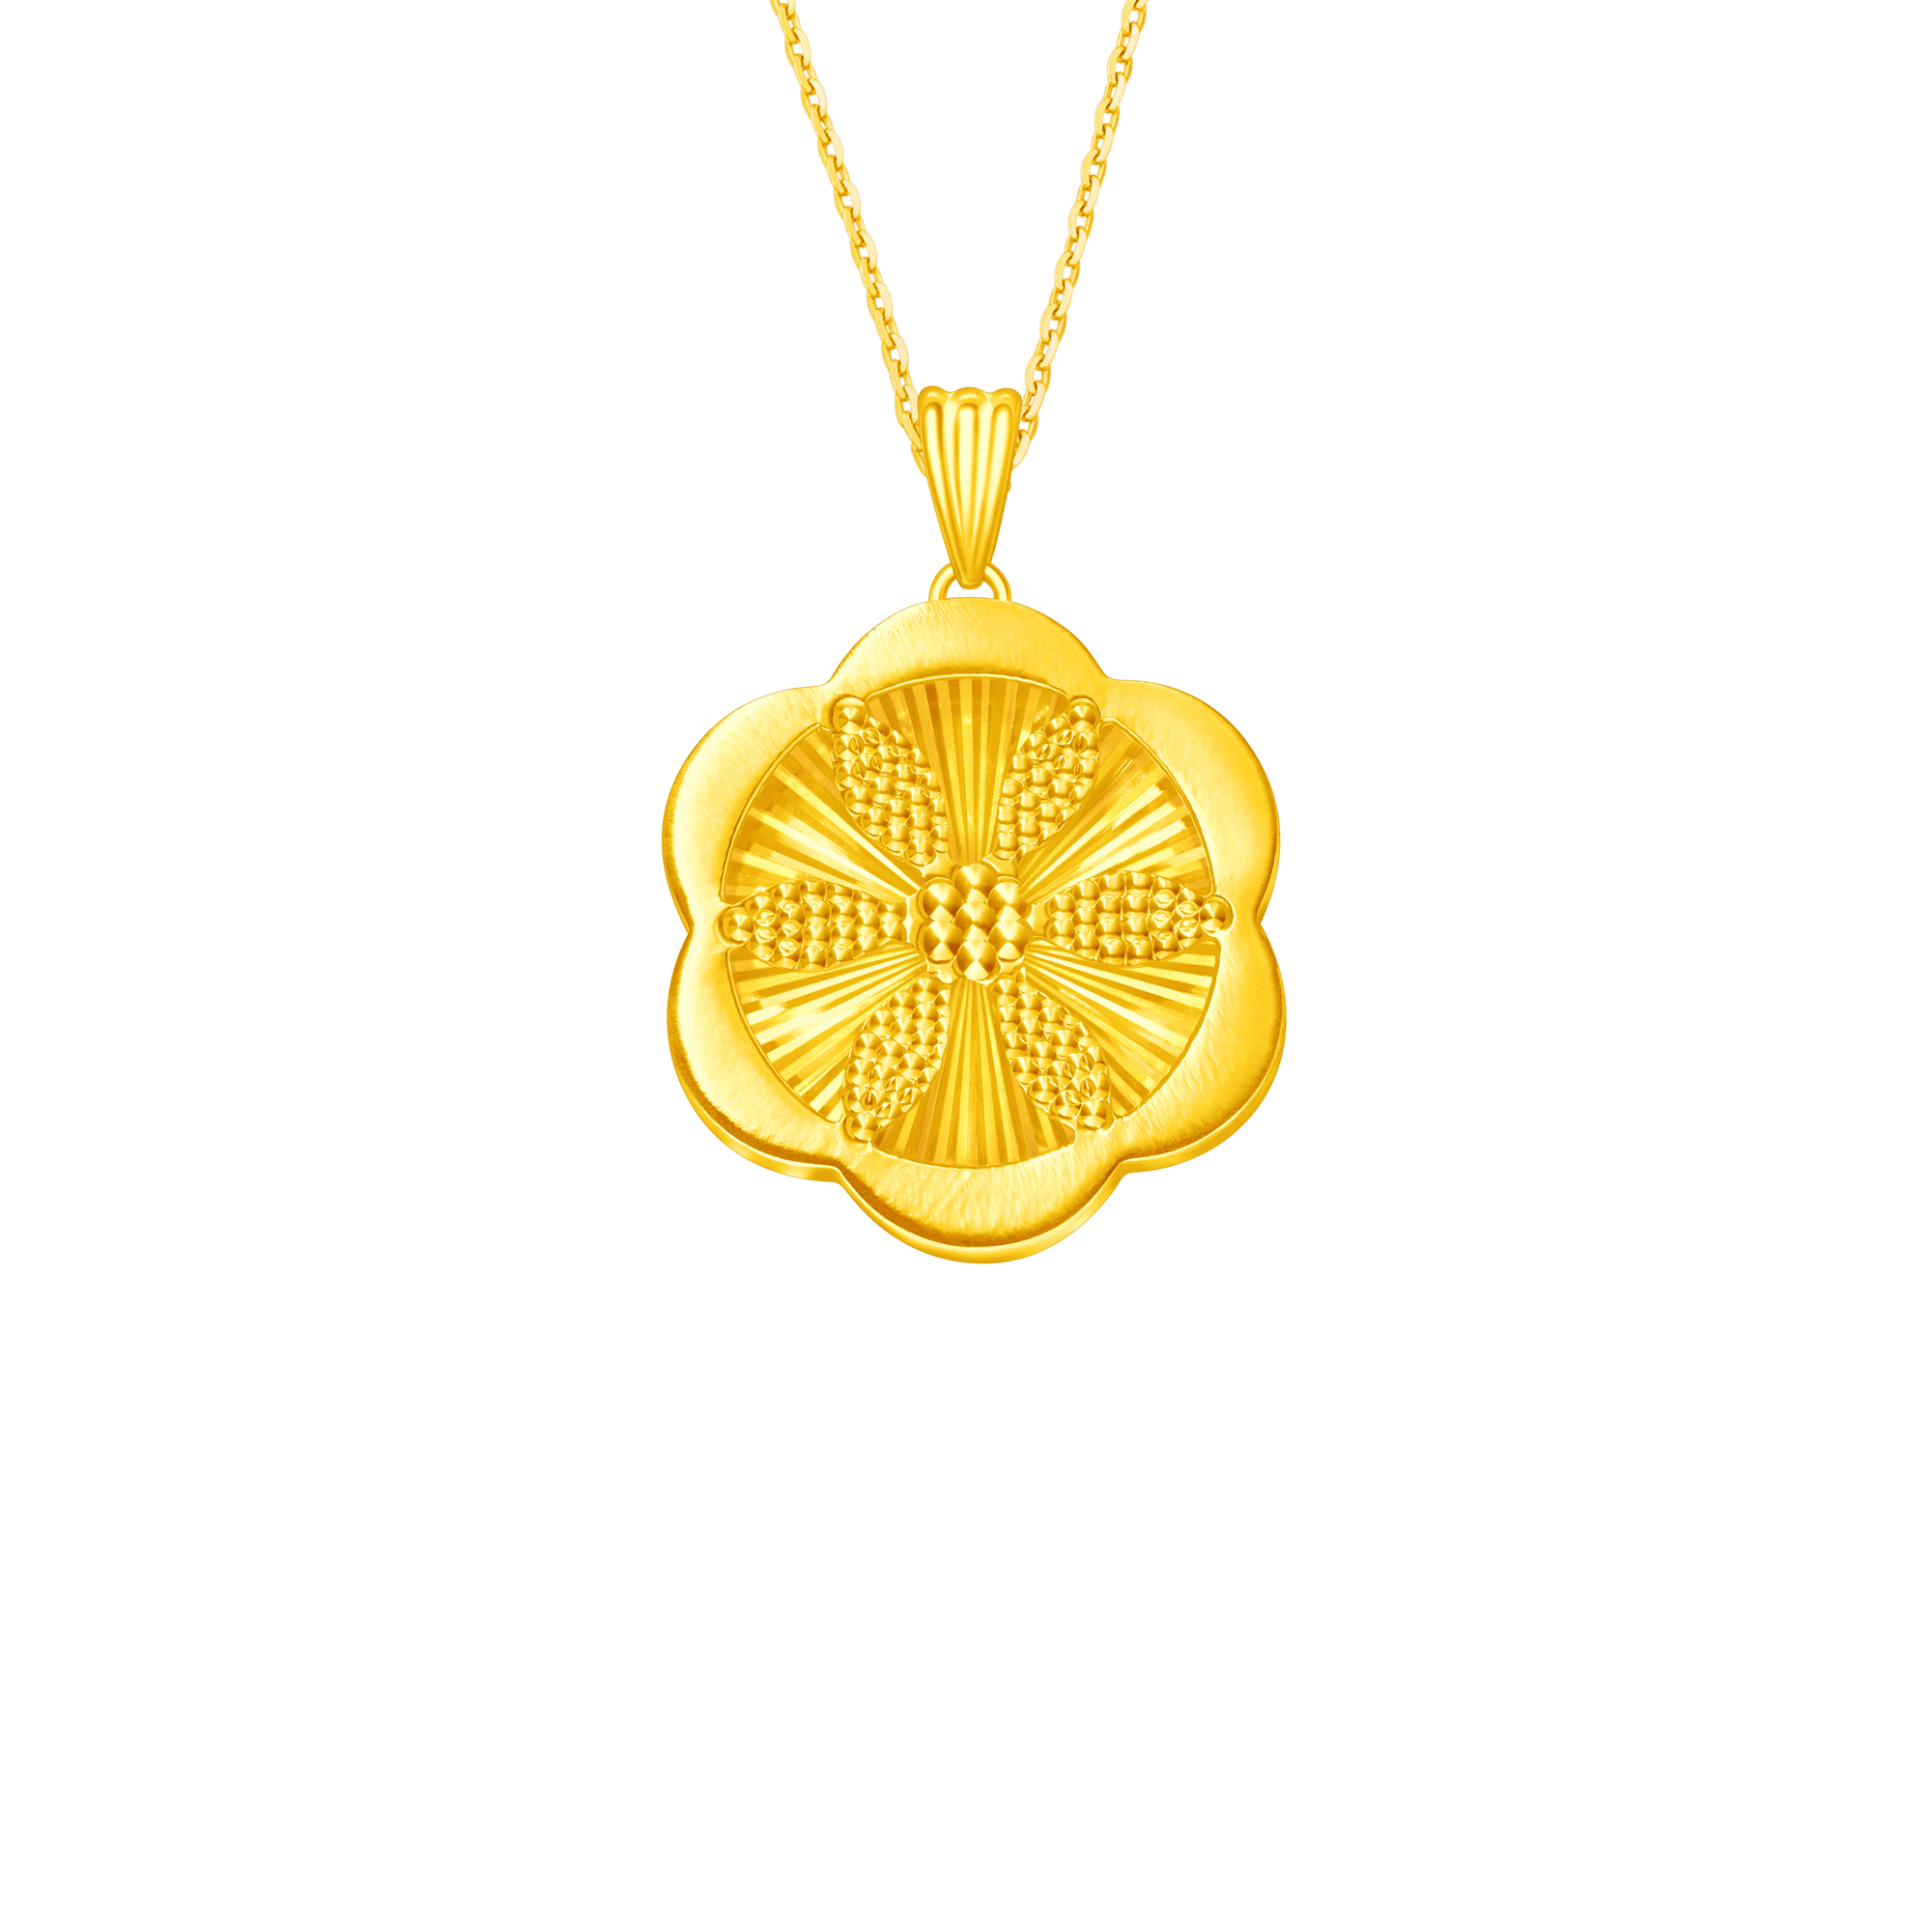 Faceted Bloom Pendant in 916 Gold